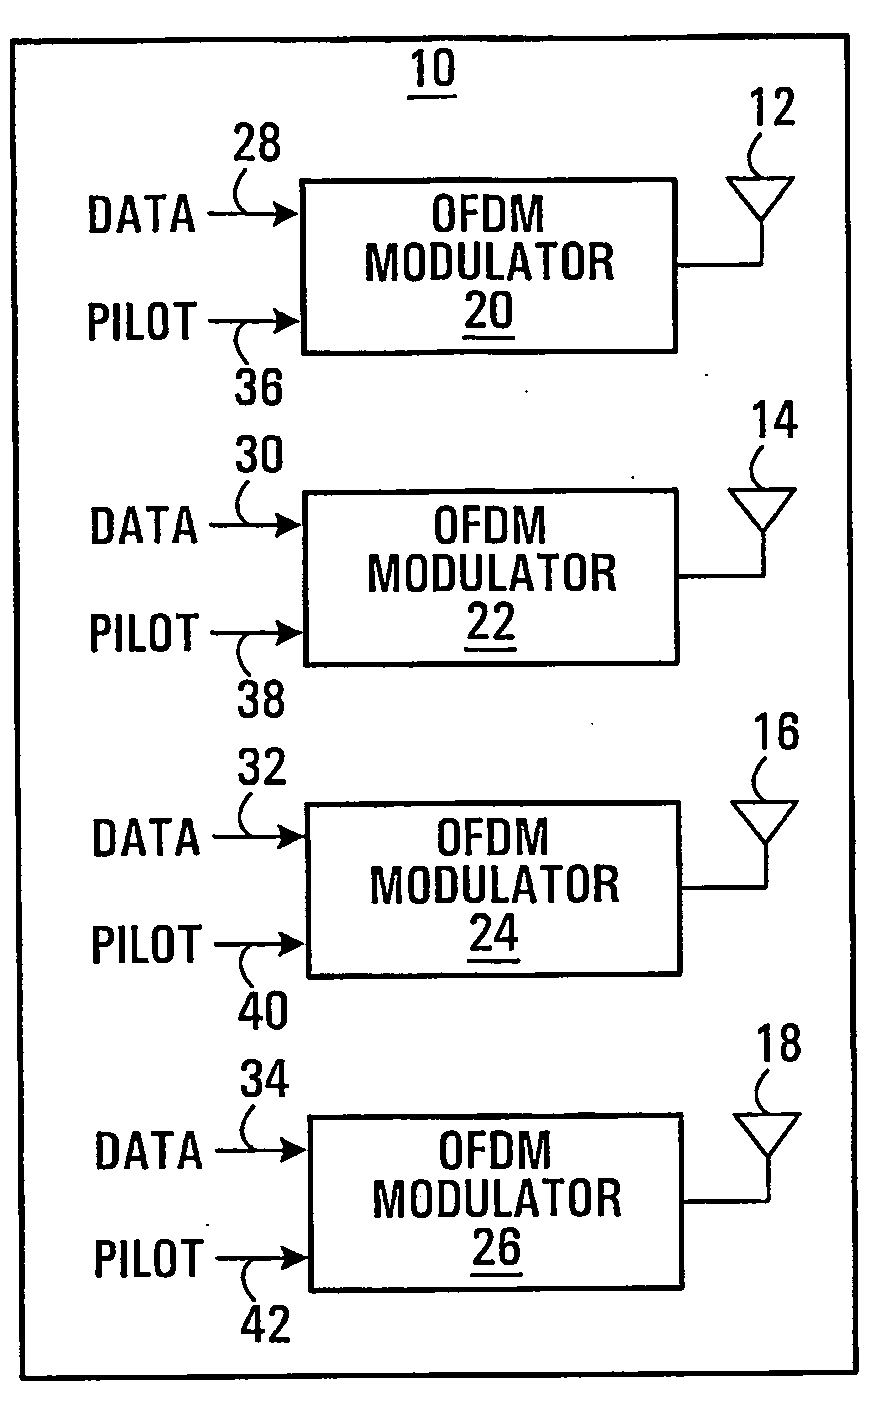 Pilot Design for Ofdm Systems with Four Transmit Antennas